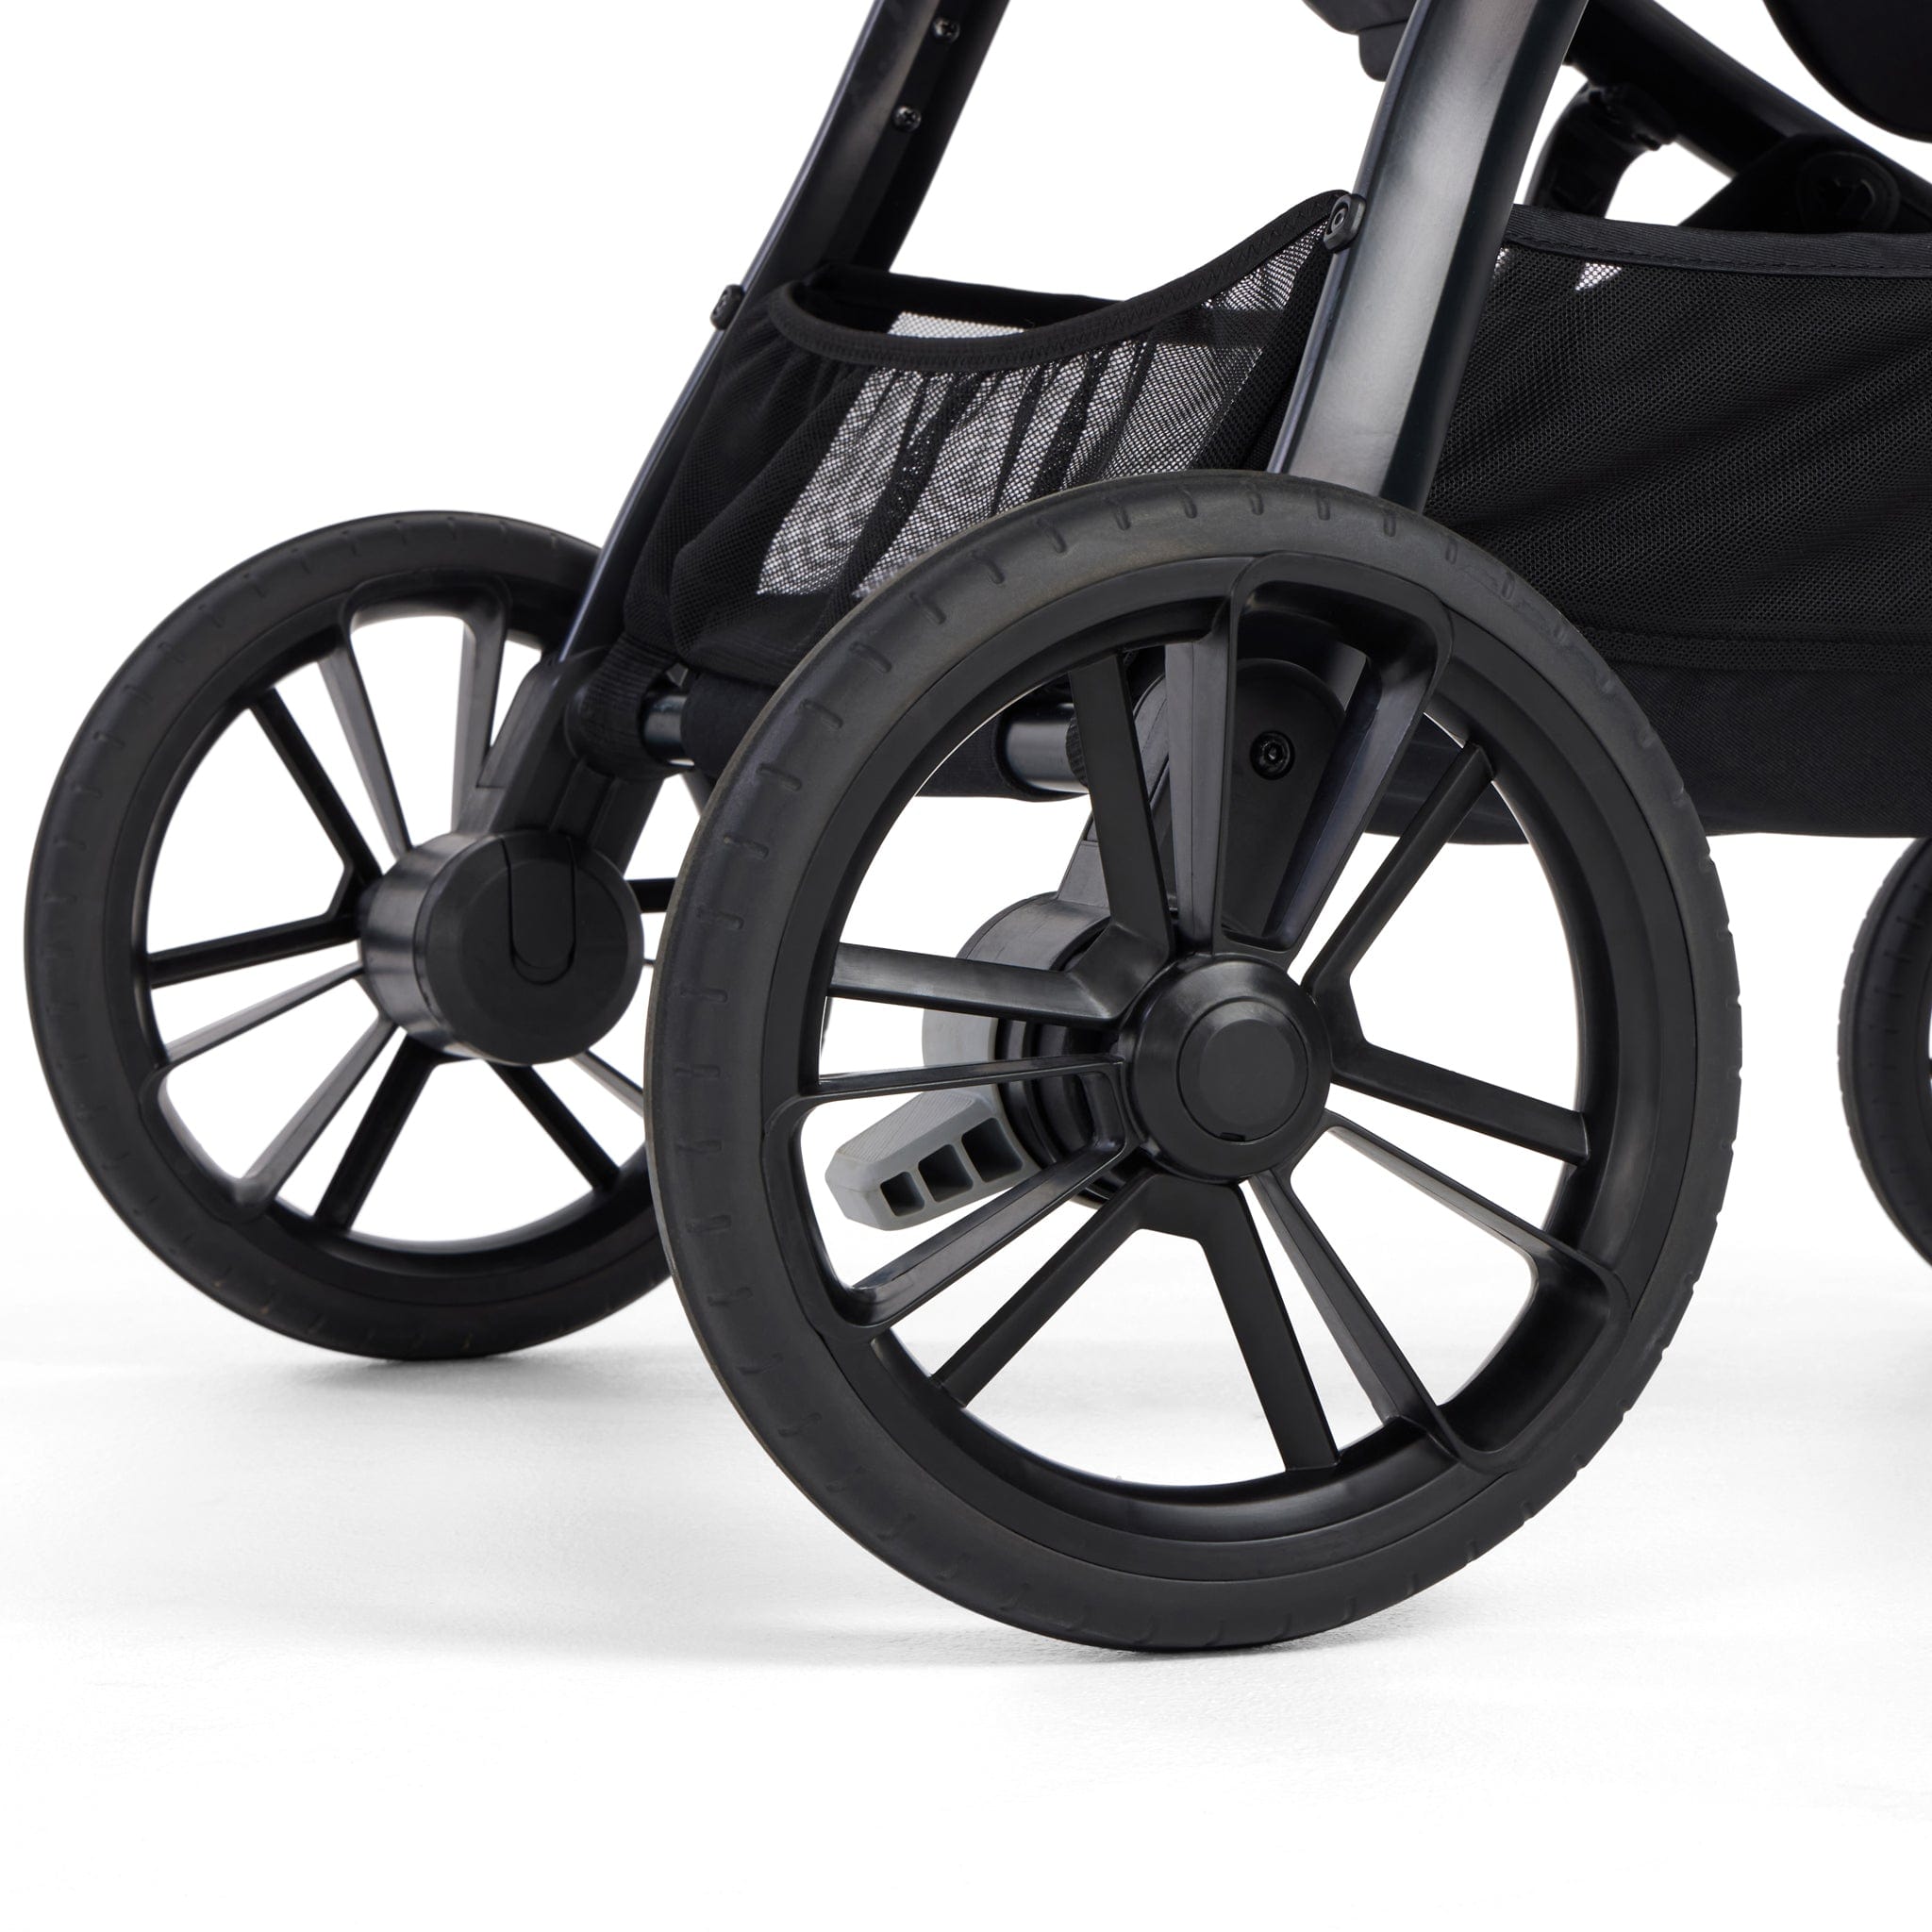 Baby Jogger City Sights Cabriofix i-Size Bundle in Deep Teal Pushchairs & Buggies CIT-TEL-11827-CAB 0047406183692